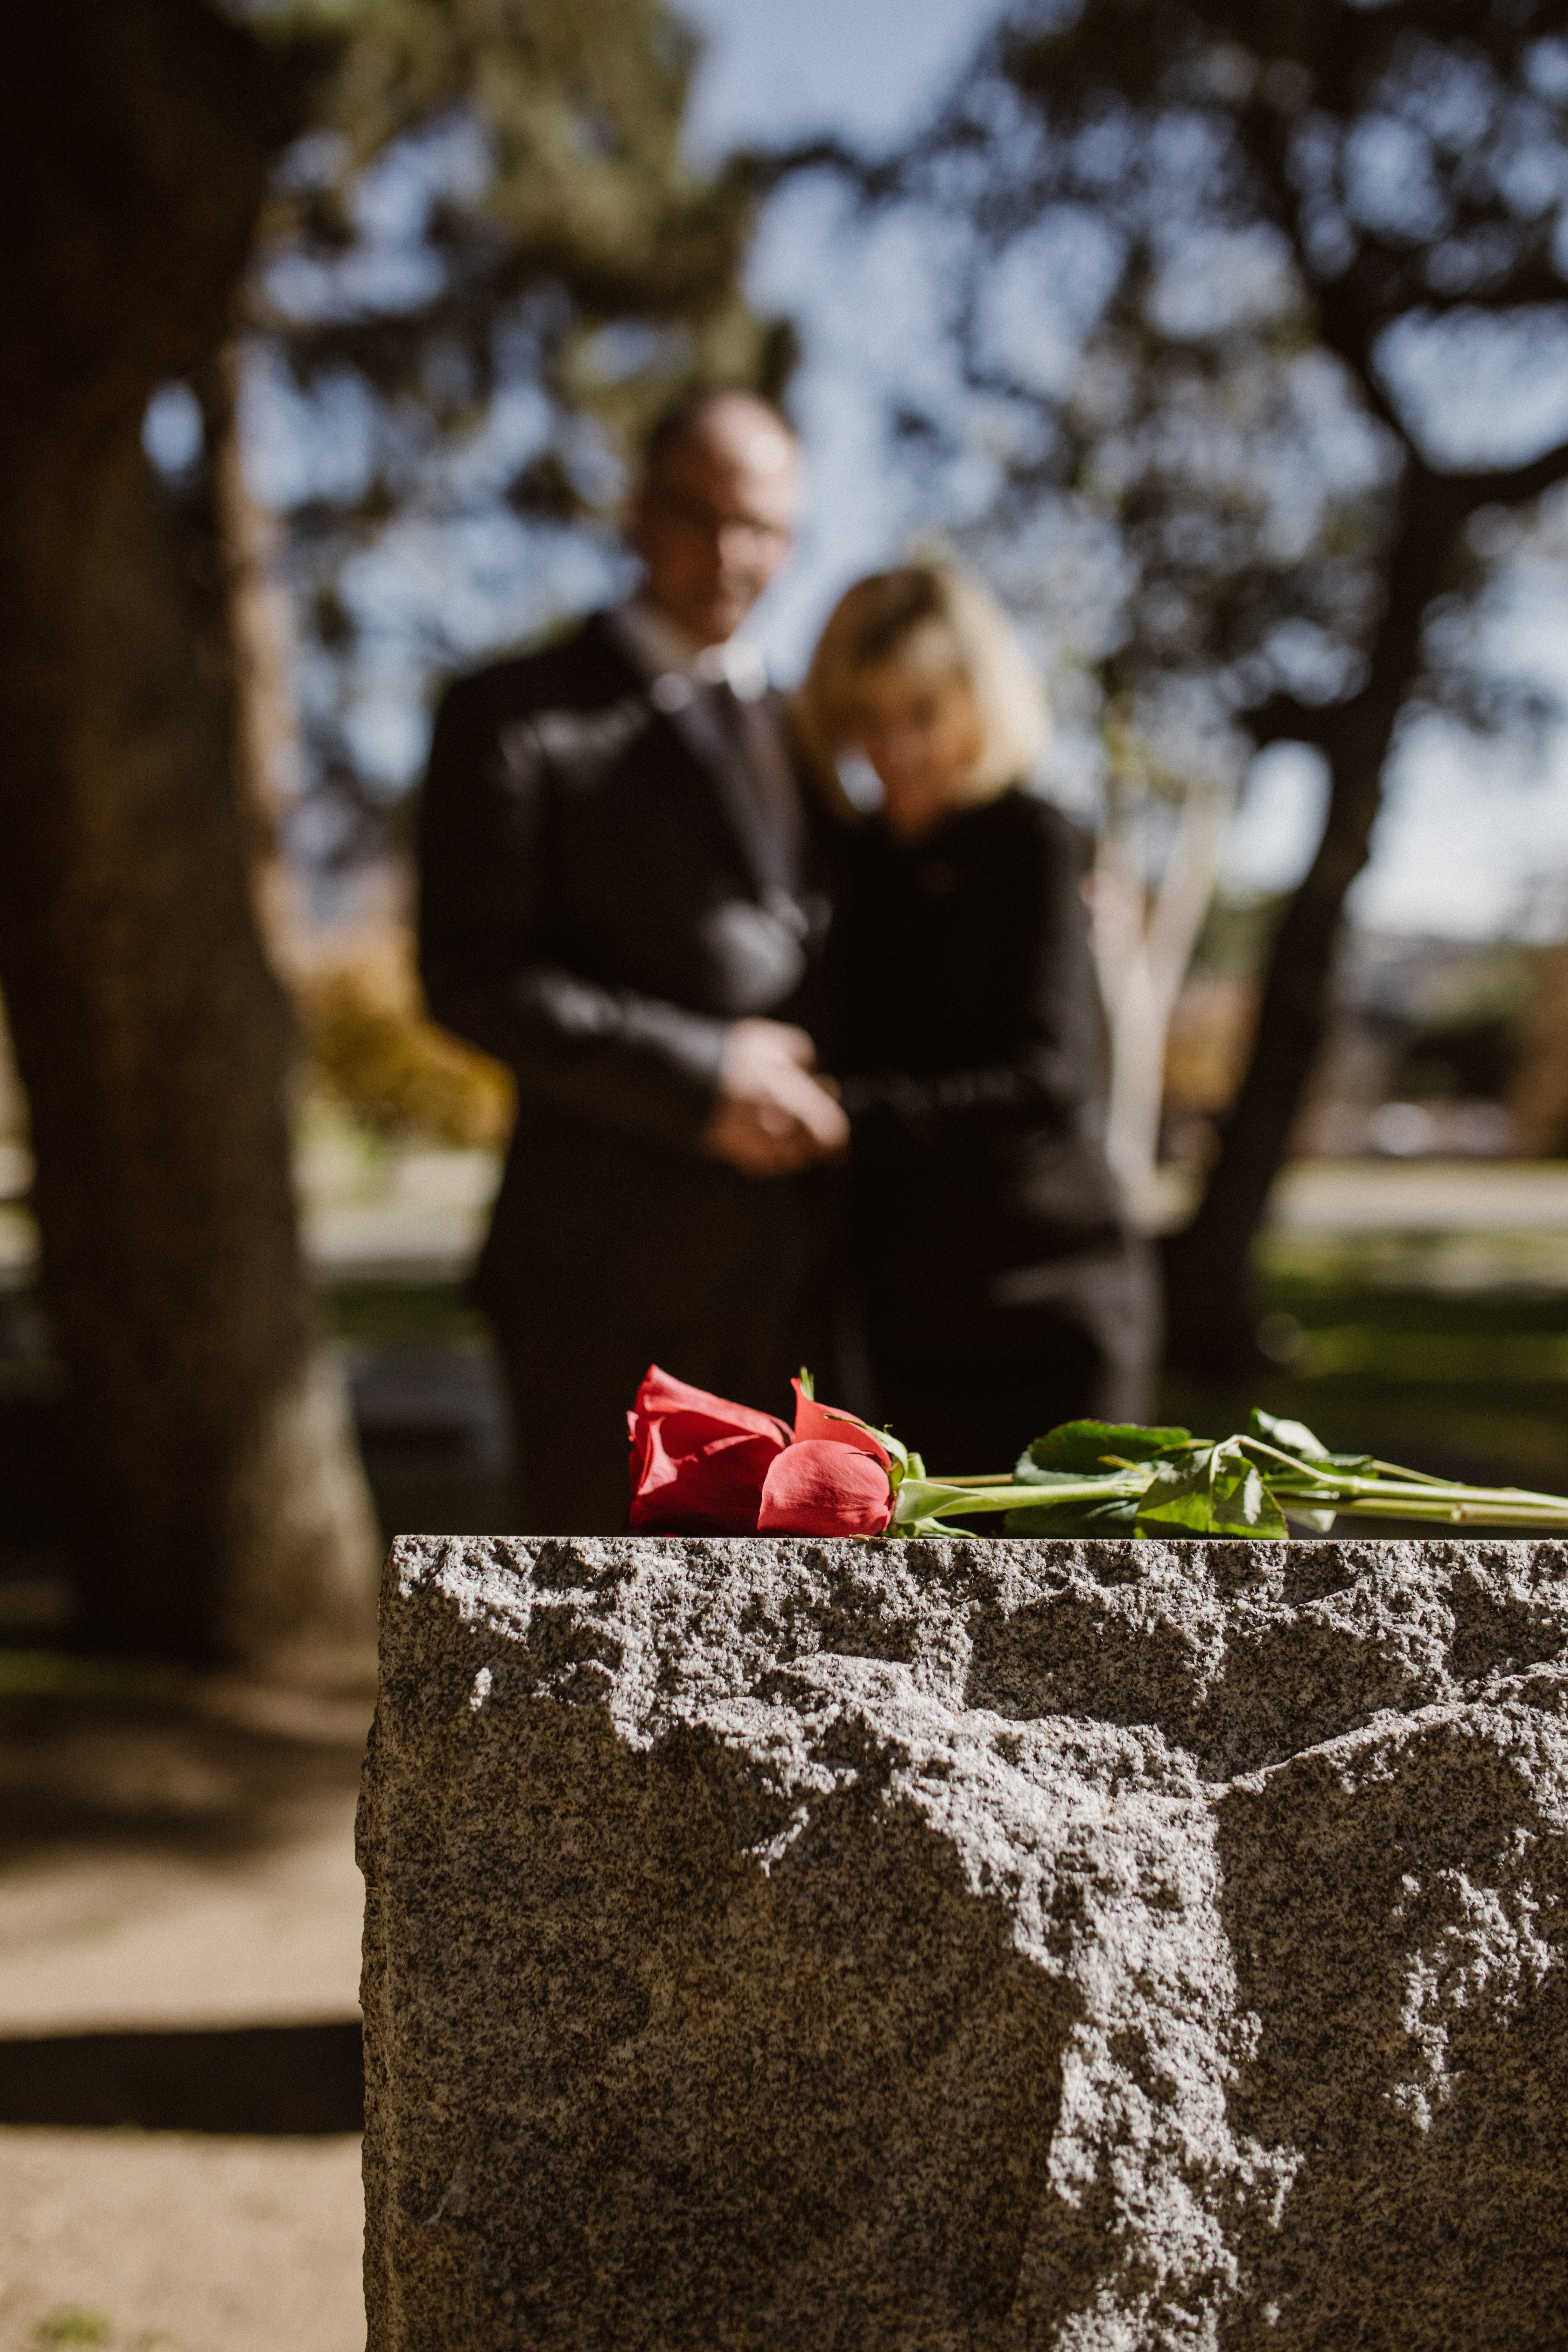 Betty and Simon were reunited at the cemetery. | Source: Pexels